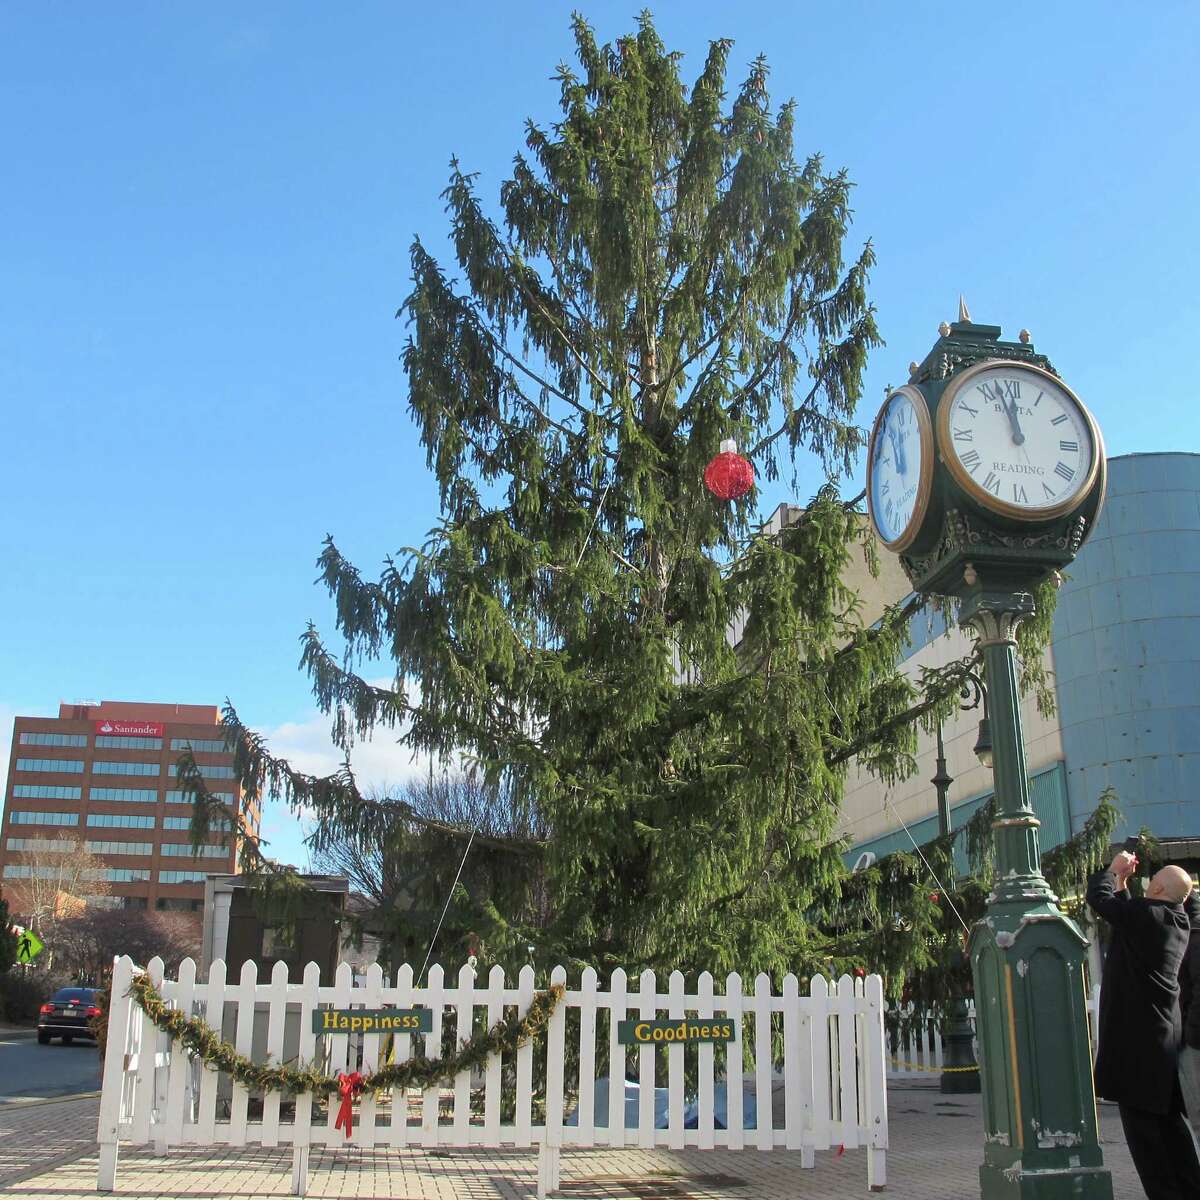 FILE - In this Dec. 12, 2014 file photo City Councilman Jeff Waltman photographs the city’s official Christmas tree in Reading, Pa. A year after its scraggly “Charlie Brown” Christmas tree caused an uproar,the city is putting up a more traditional tannenbaum this holiday season. The official Christmas tree in Reading will be a pleasingly plump, 25-foot-tall white fir, cut down on Monday, Nov. 9, 2015.